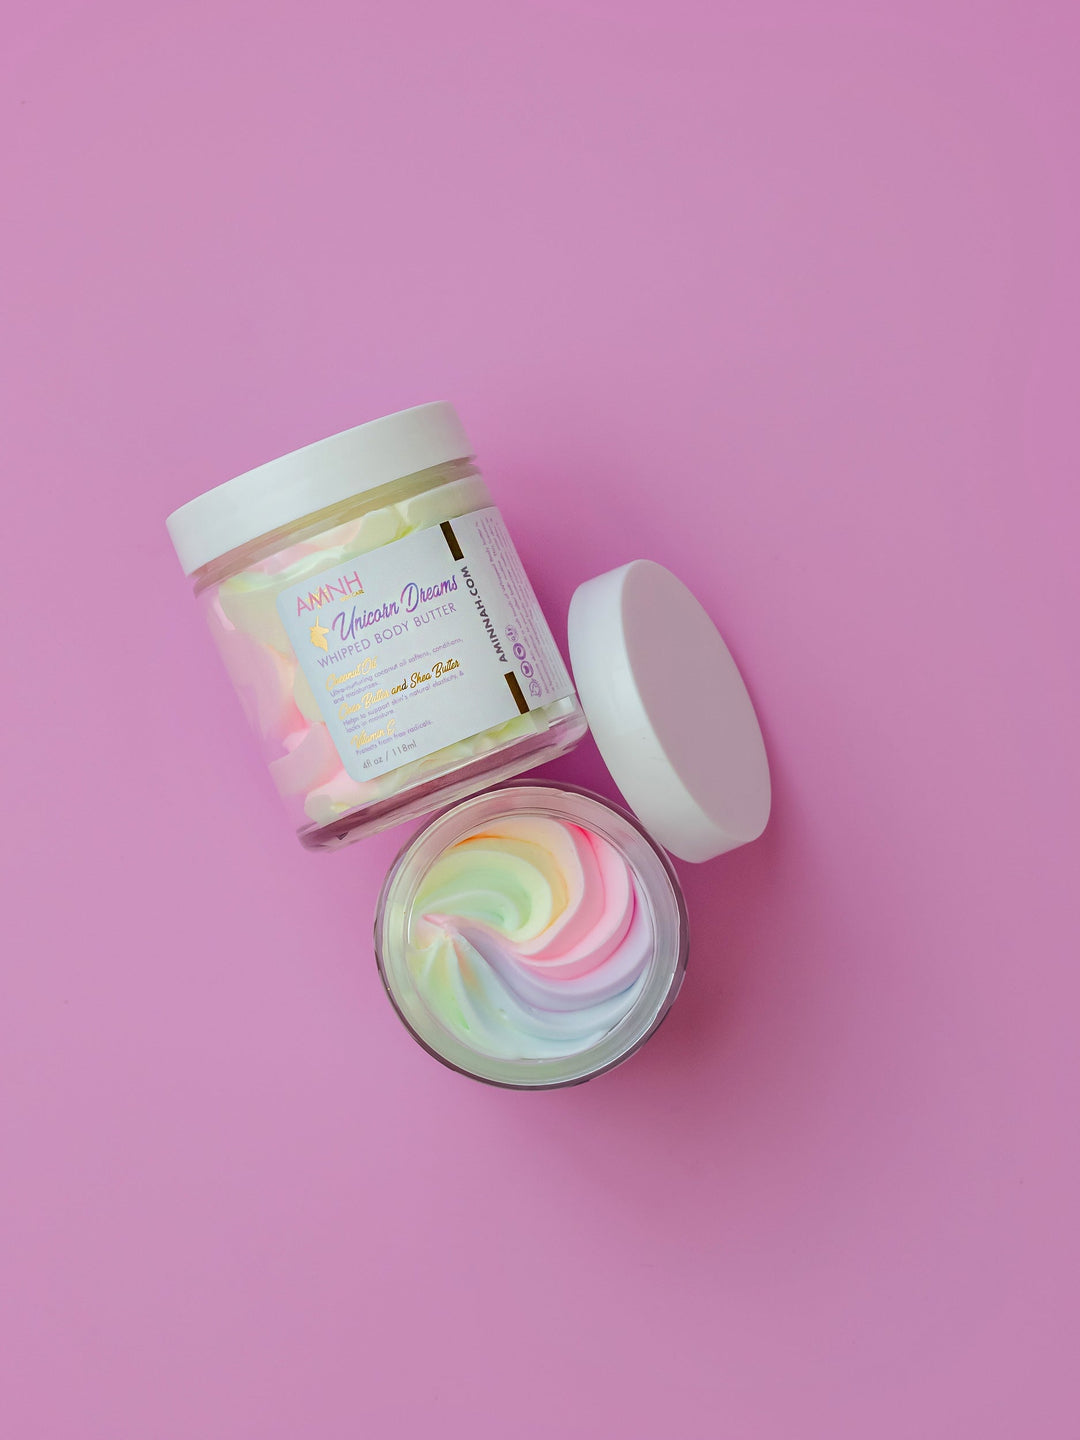 "Unicorn Dreams" Whipped Body Butter Personal Care AMINNAH 4oz 